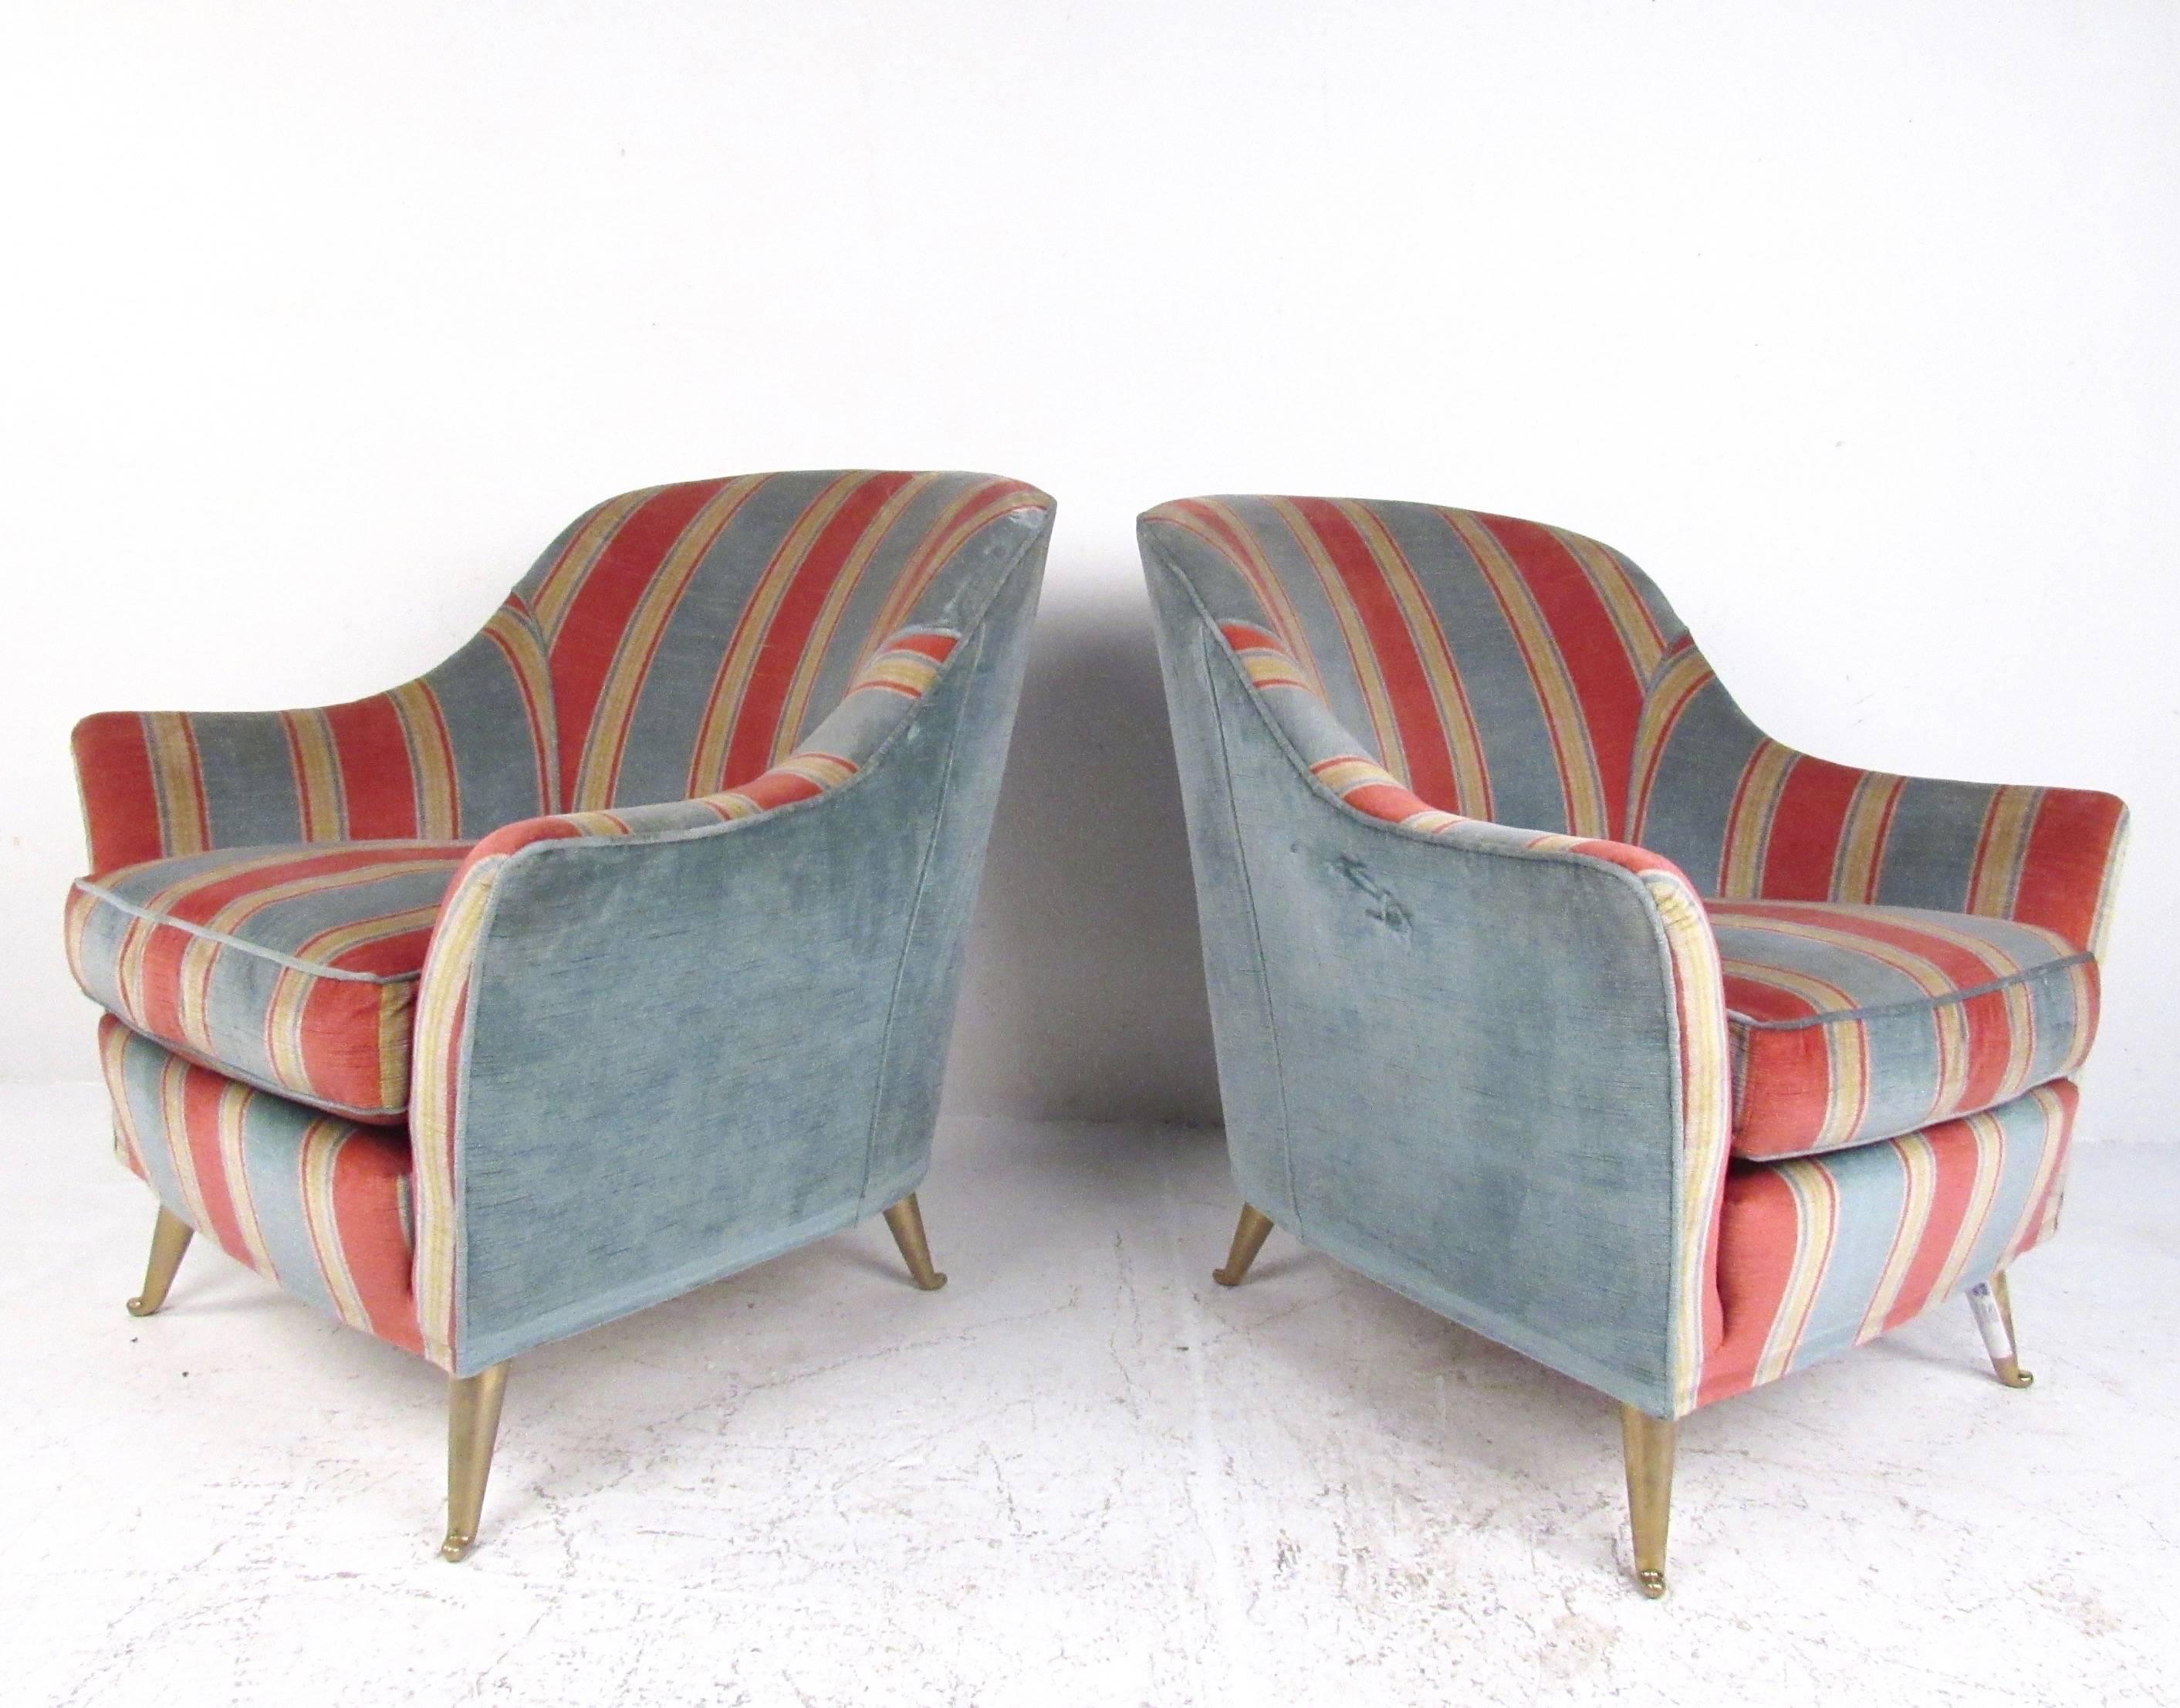 This stylish modern pair of Italian modern lounge chairs feature tapered brass legs, comfortable rounded seat backs, and unique vintage upholstery. The iconic style of Gio Ponti makes this midcentury pair the perfect addition to home or business